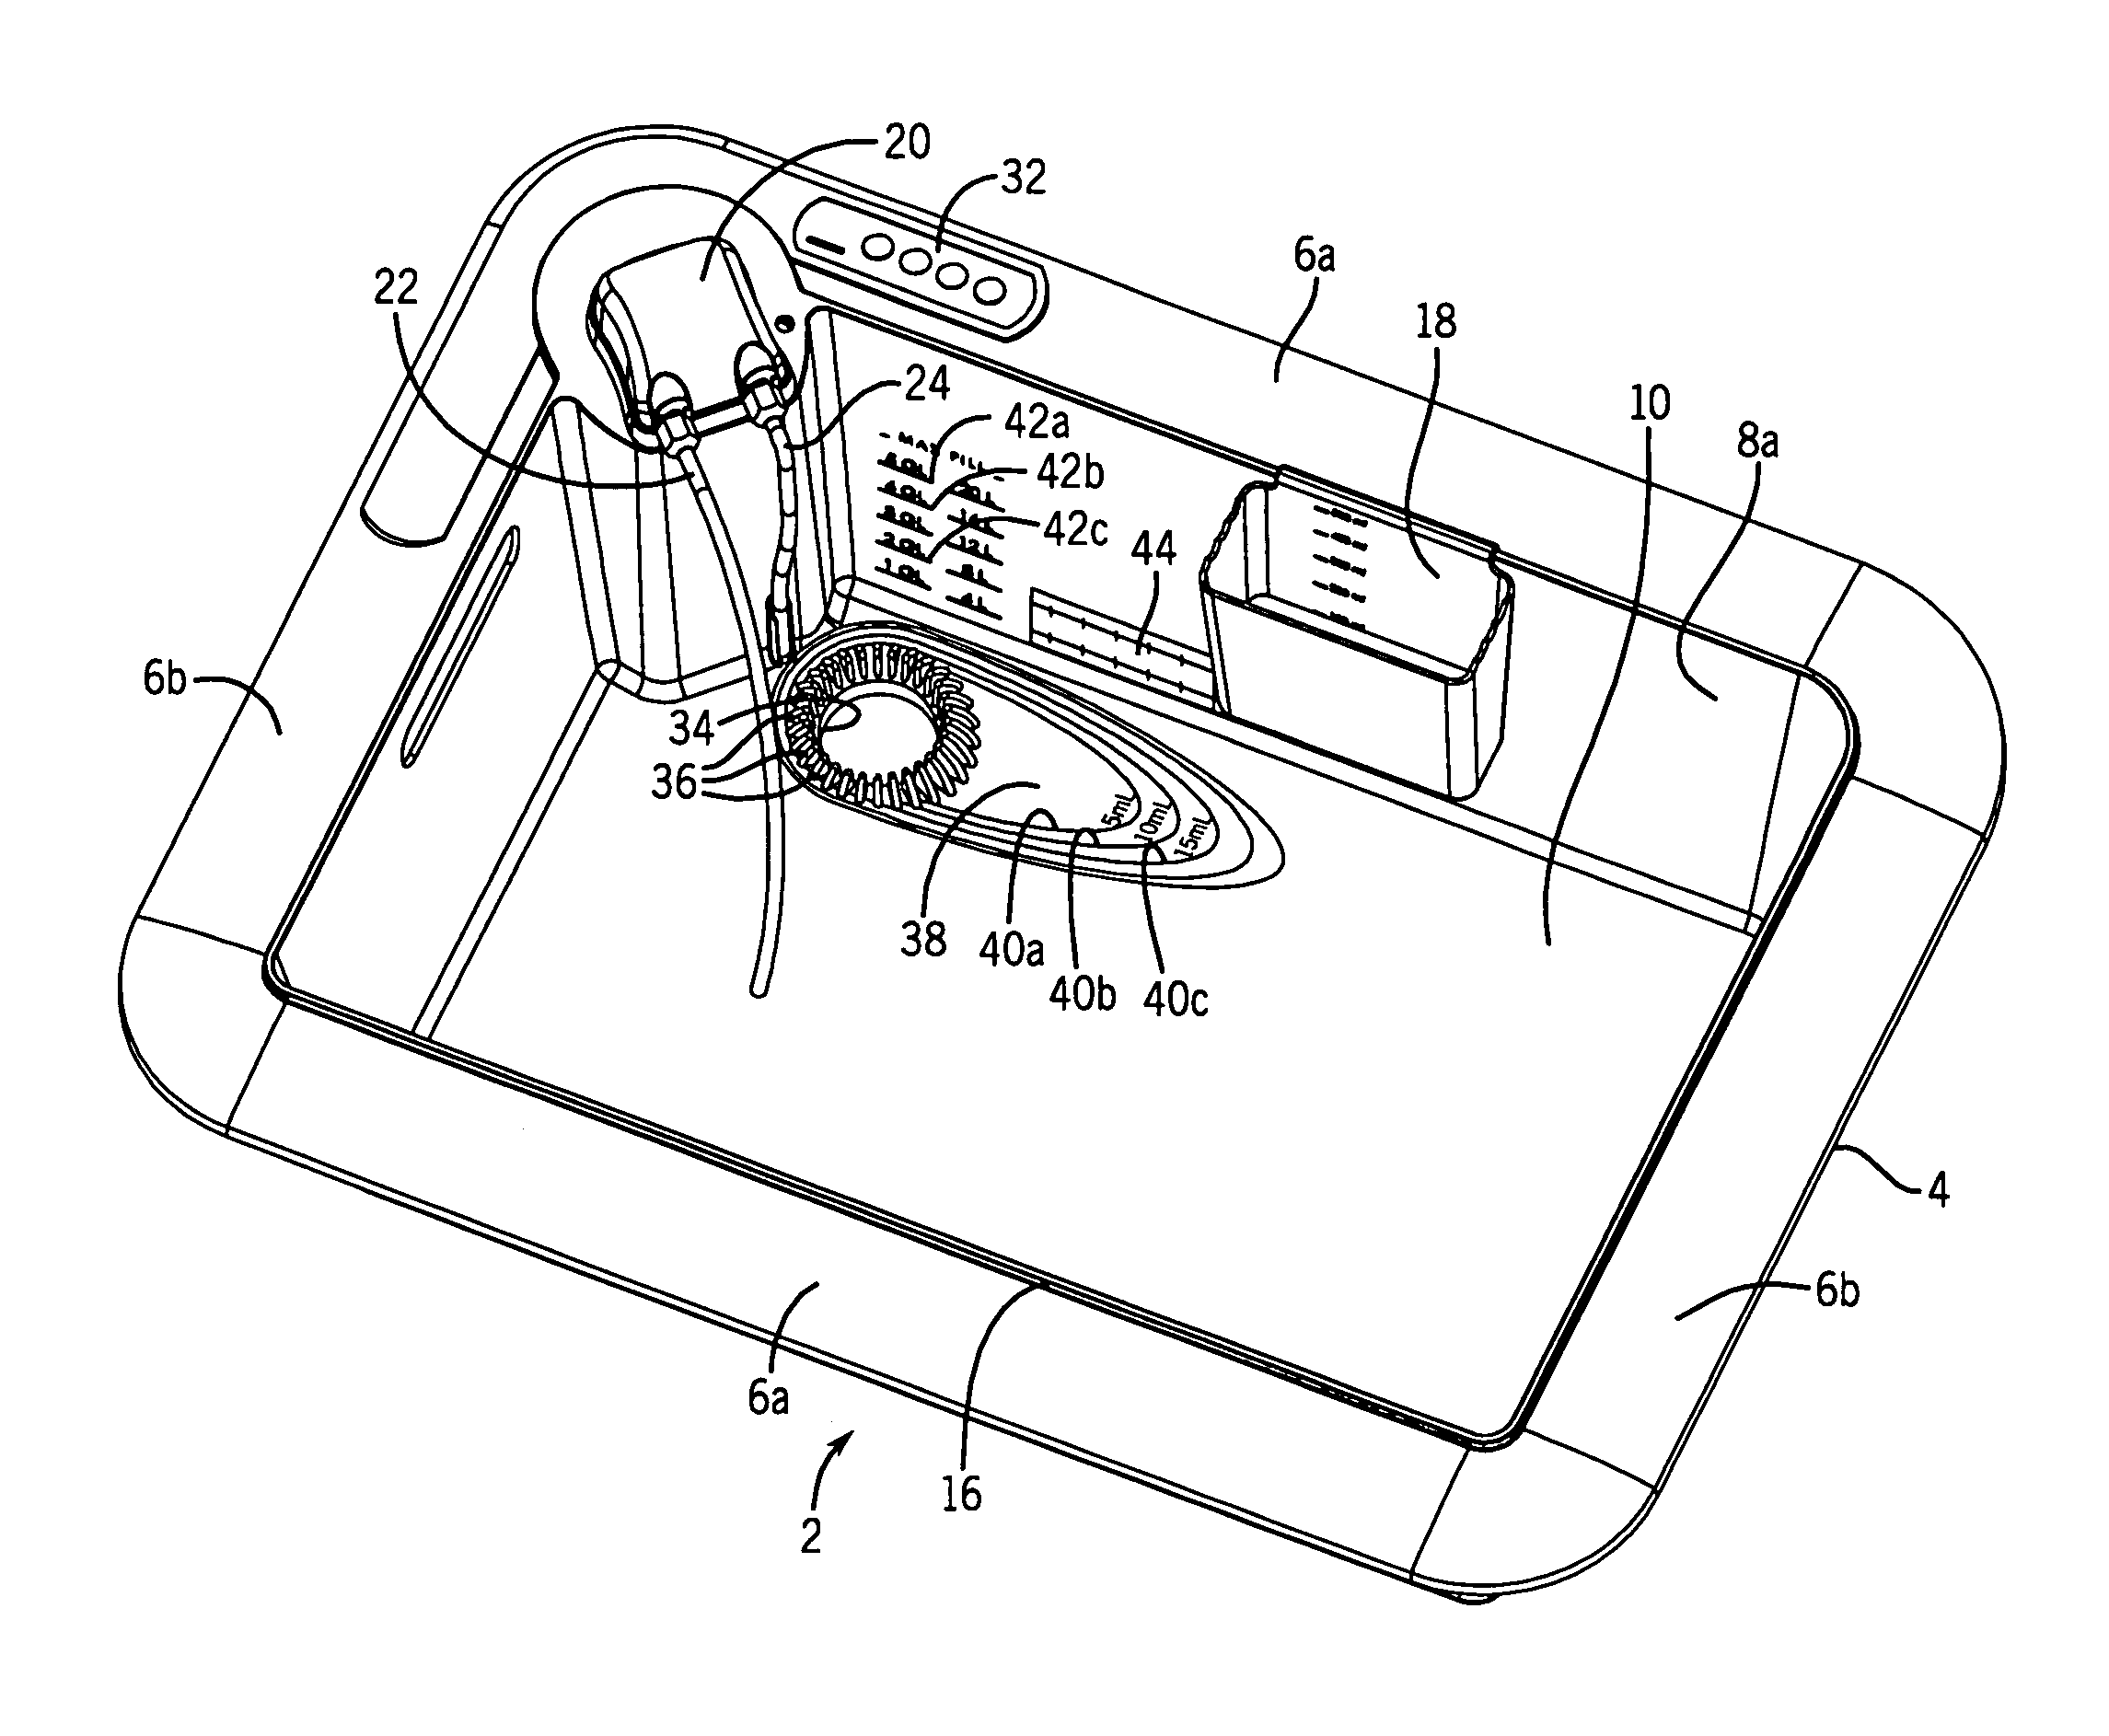 Sink insert for cleaning a medical or surgical device